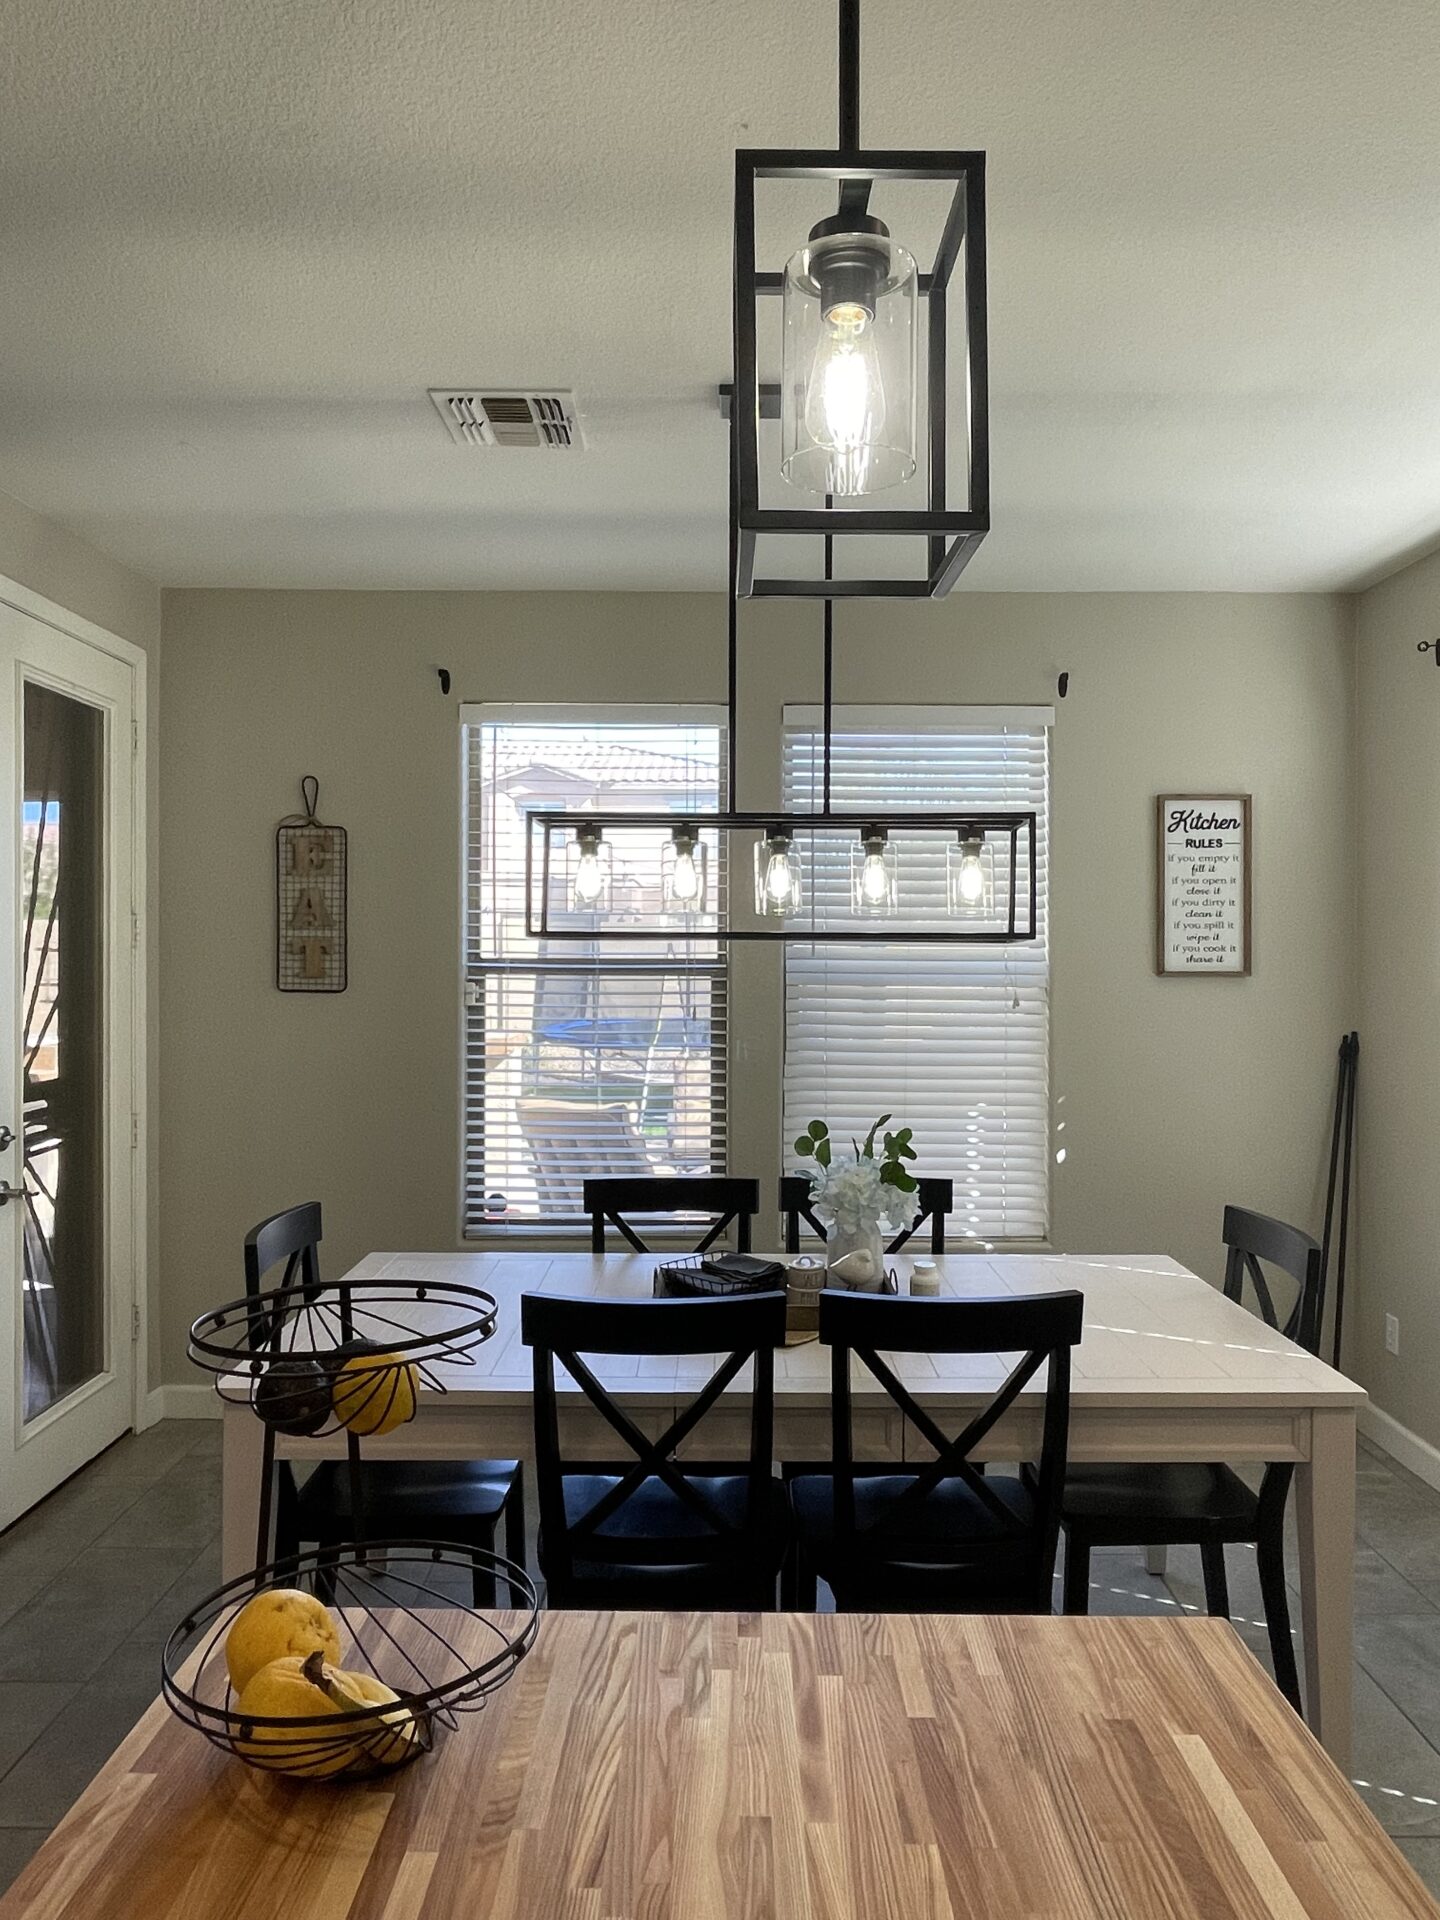 A dining room table with chairs and a light fixture.